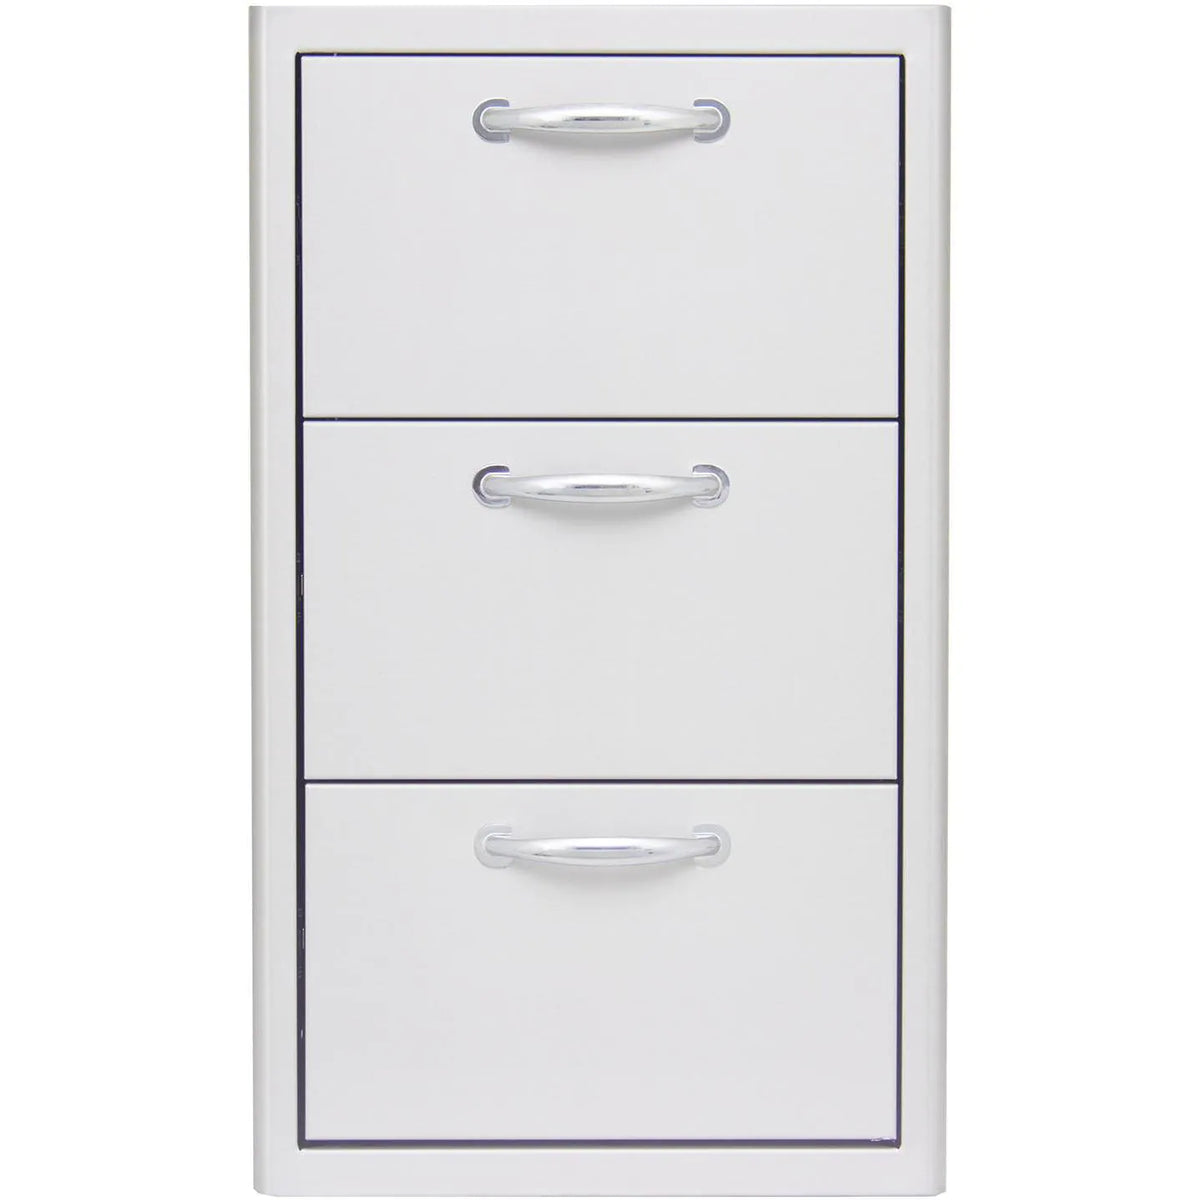 Blaze 16 Inch Triple Access Drawer Front View